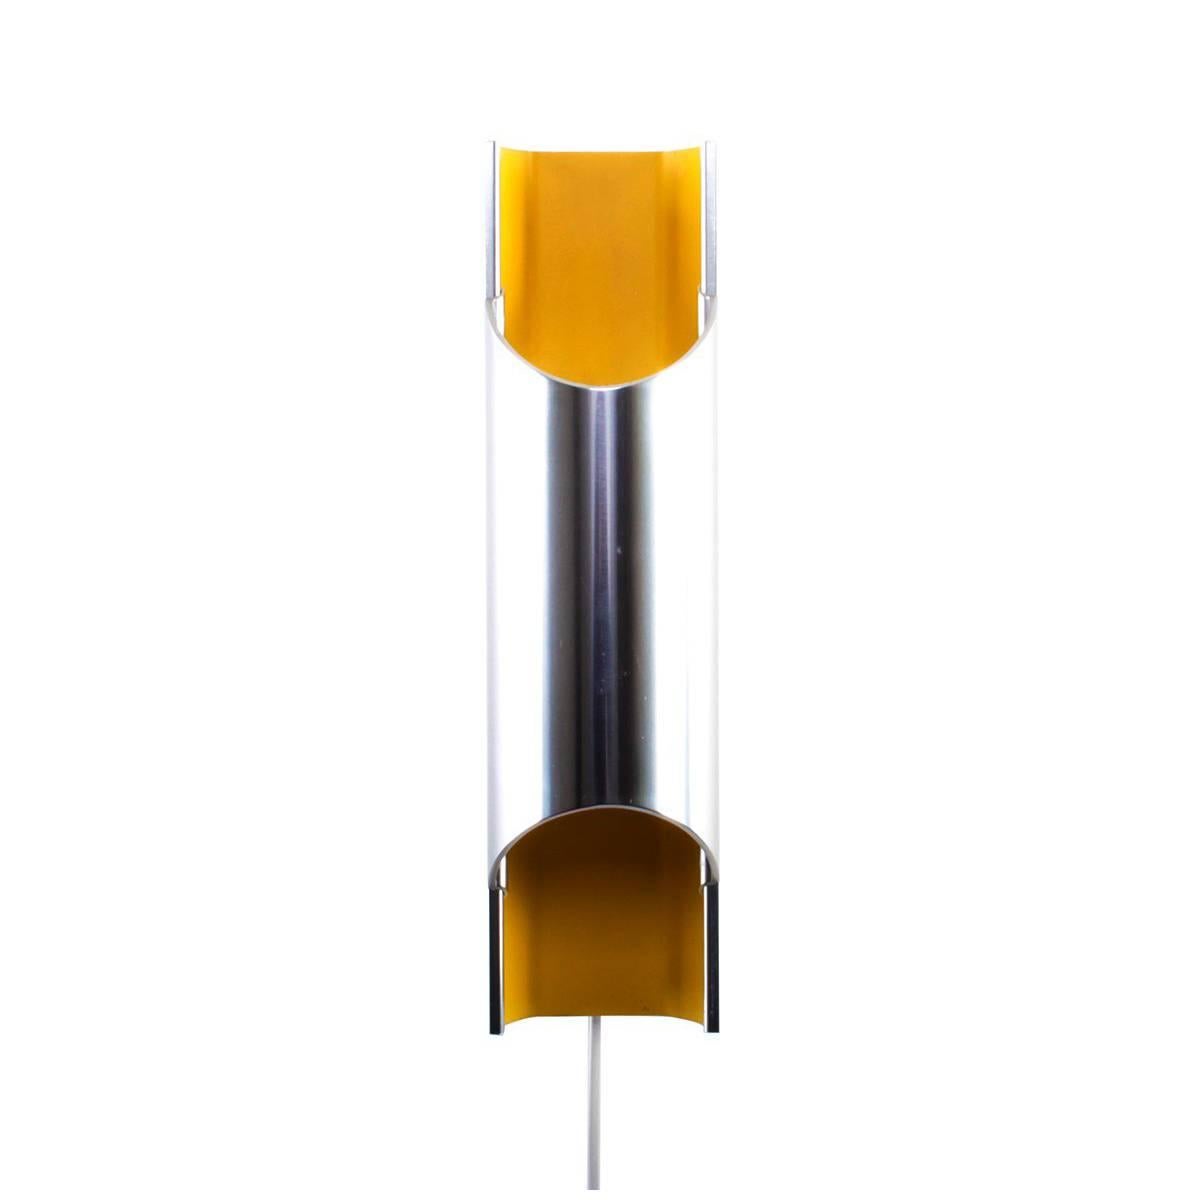 Pandean Sconce by Bent Karlby, Lyfa, Beautiful Yellow and Aluminium Wall Lamp For Sale